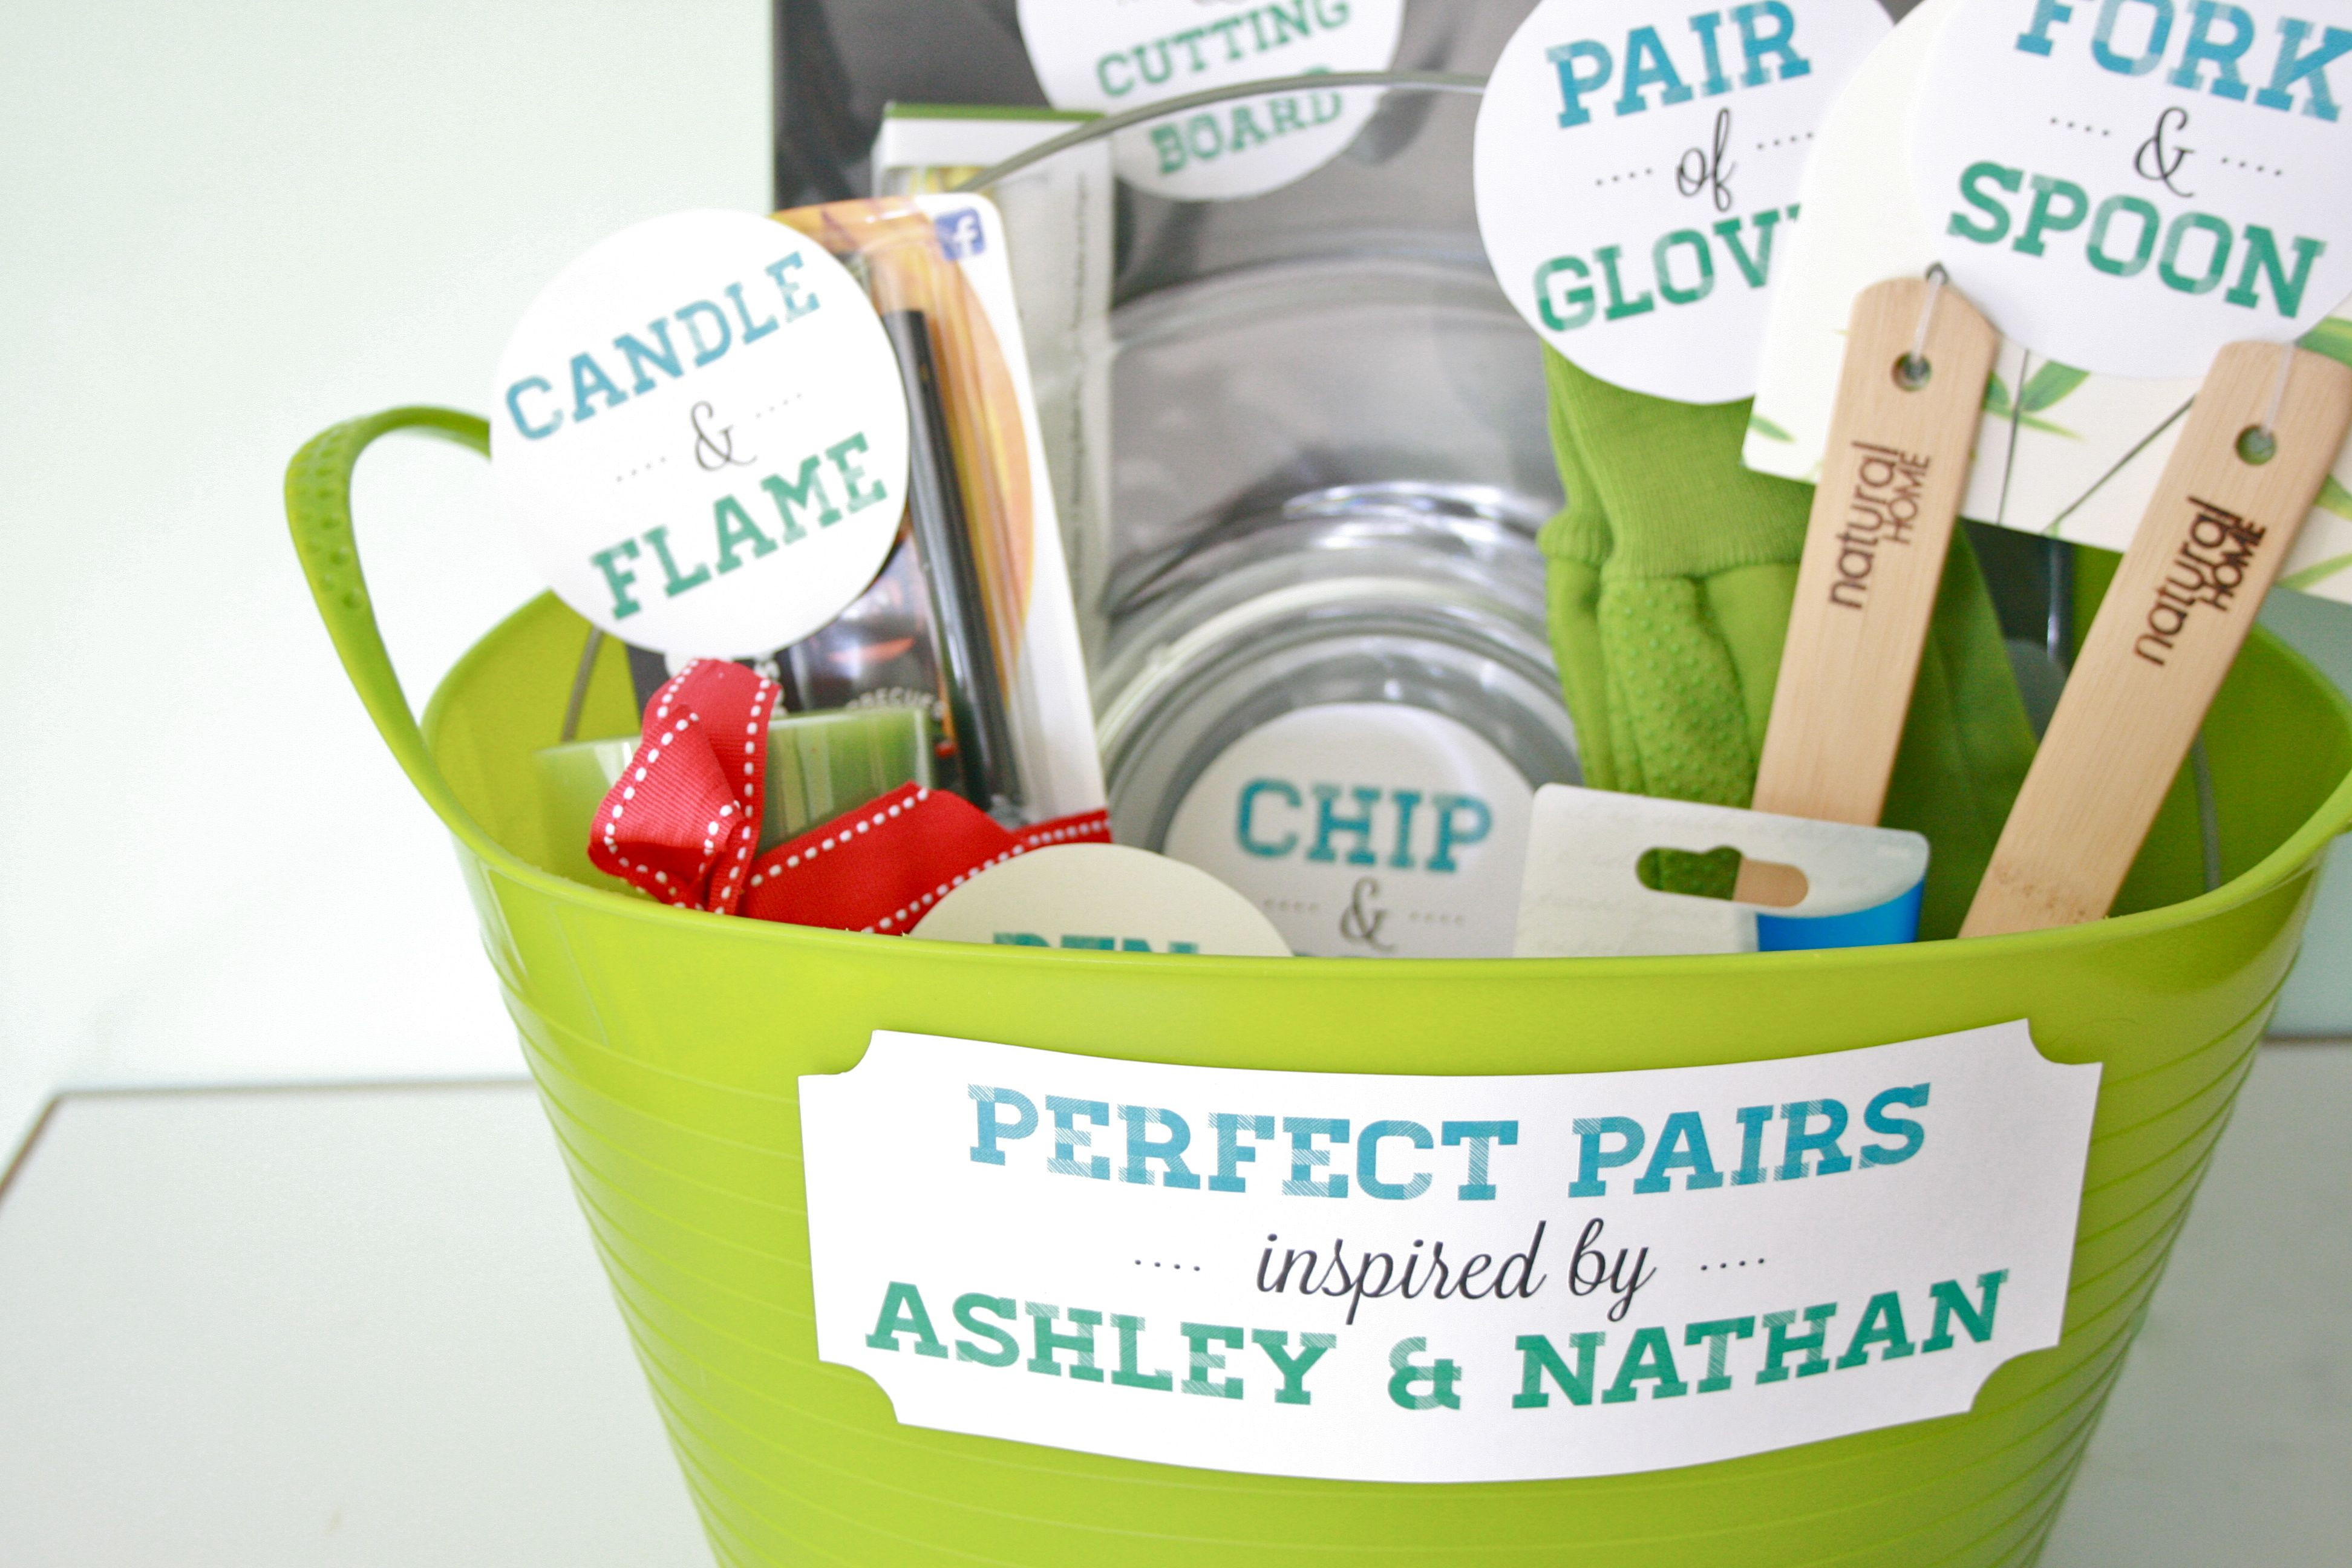 Gift Basket Ideas For Bridal Shower
 DIY "Perfect Pairs" Bridal Shower Gift